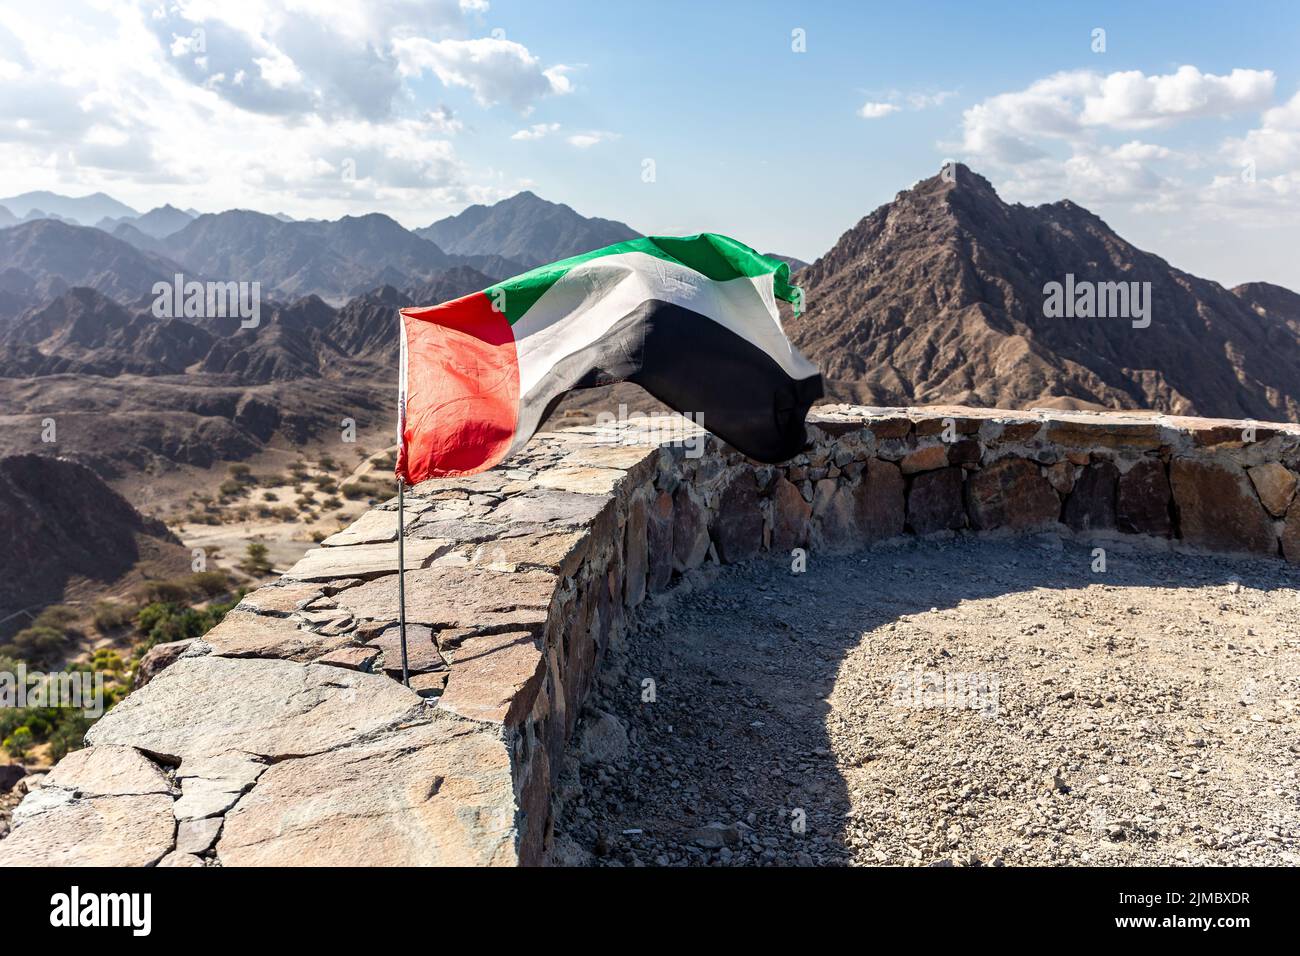 United Arab Emirates national flag waving on the wind, attached to a stone wall at the top od Wadi Shawka staircase, with Al Hajar Mountains. Stock Photo